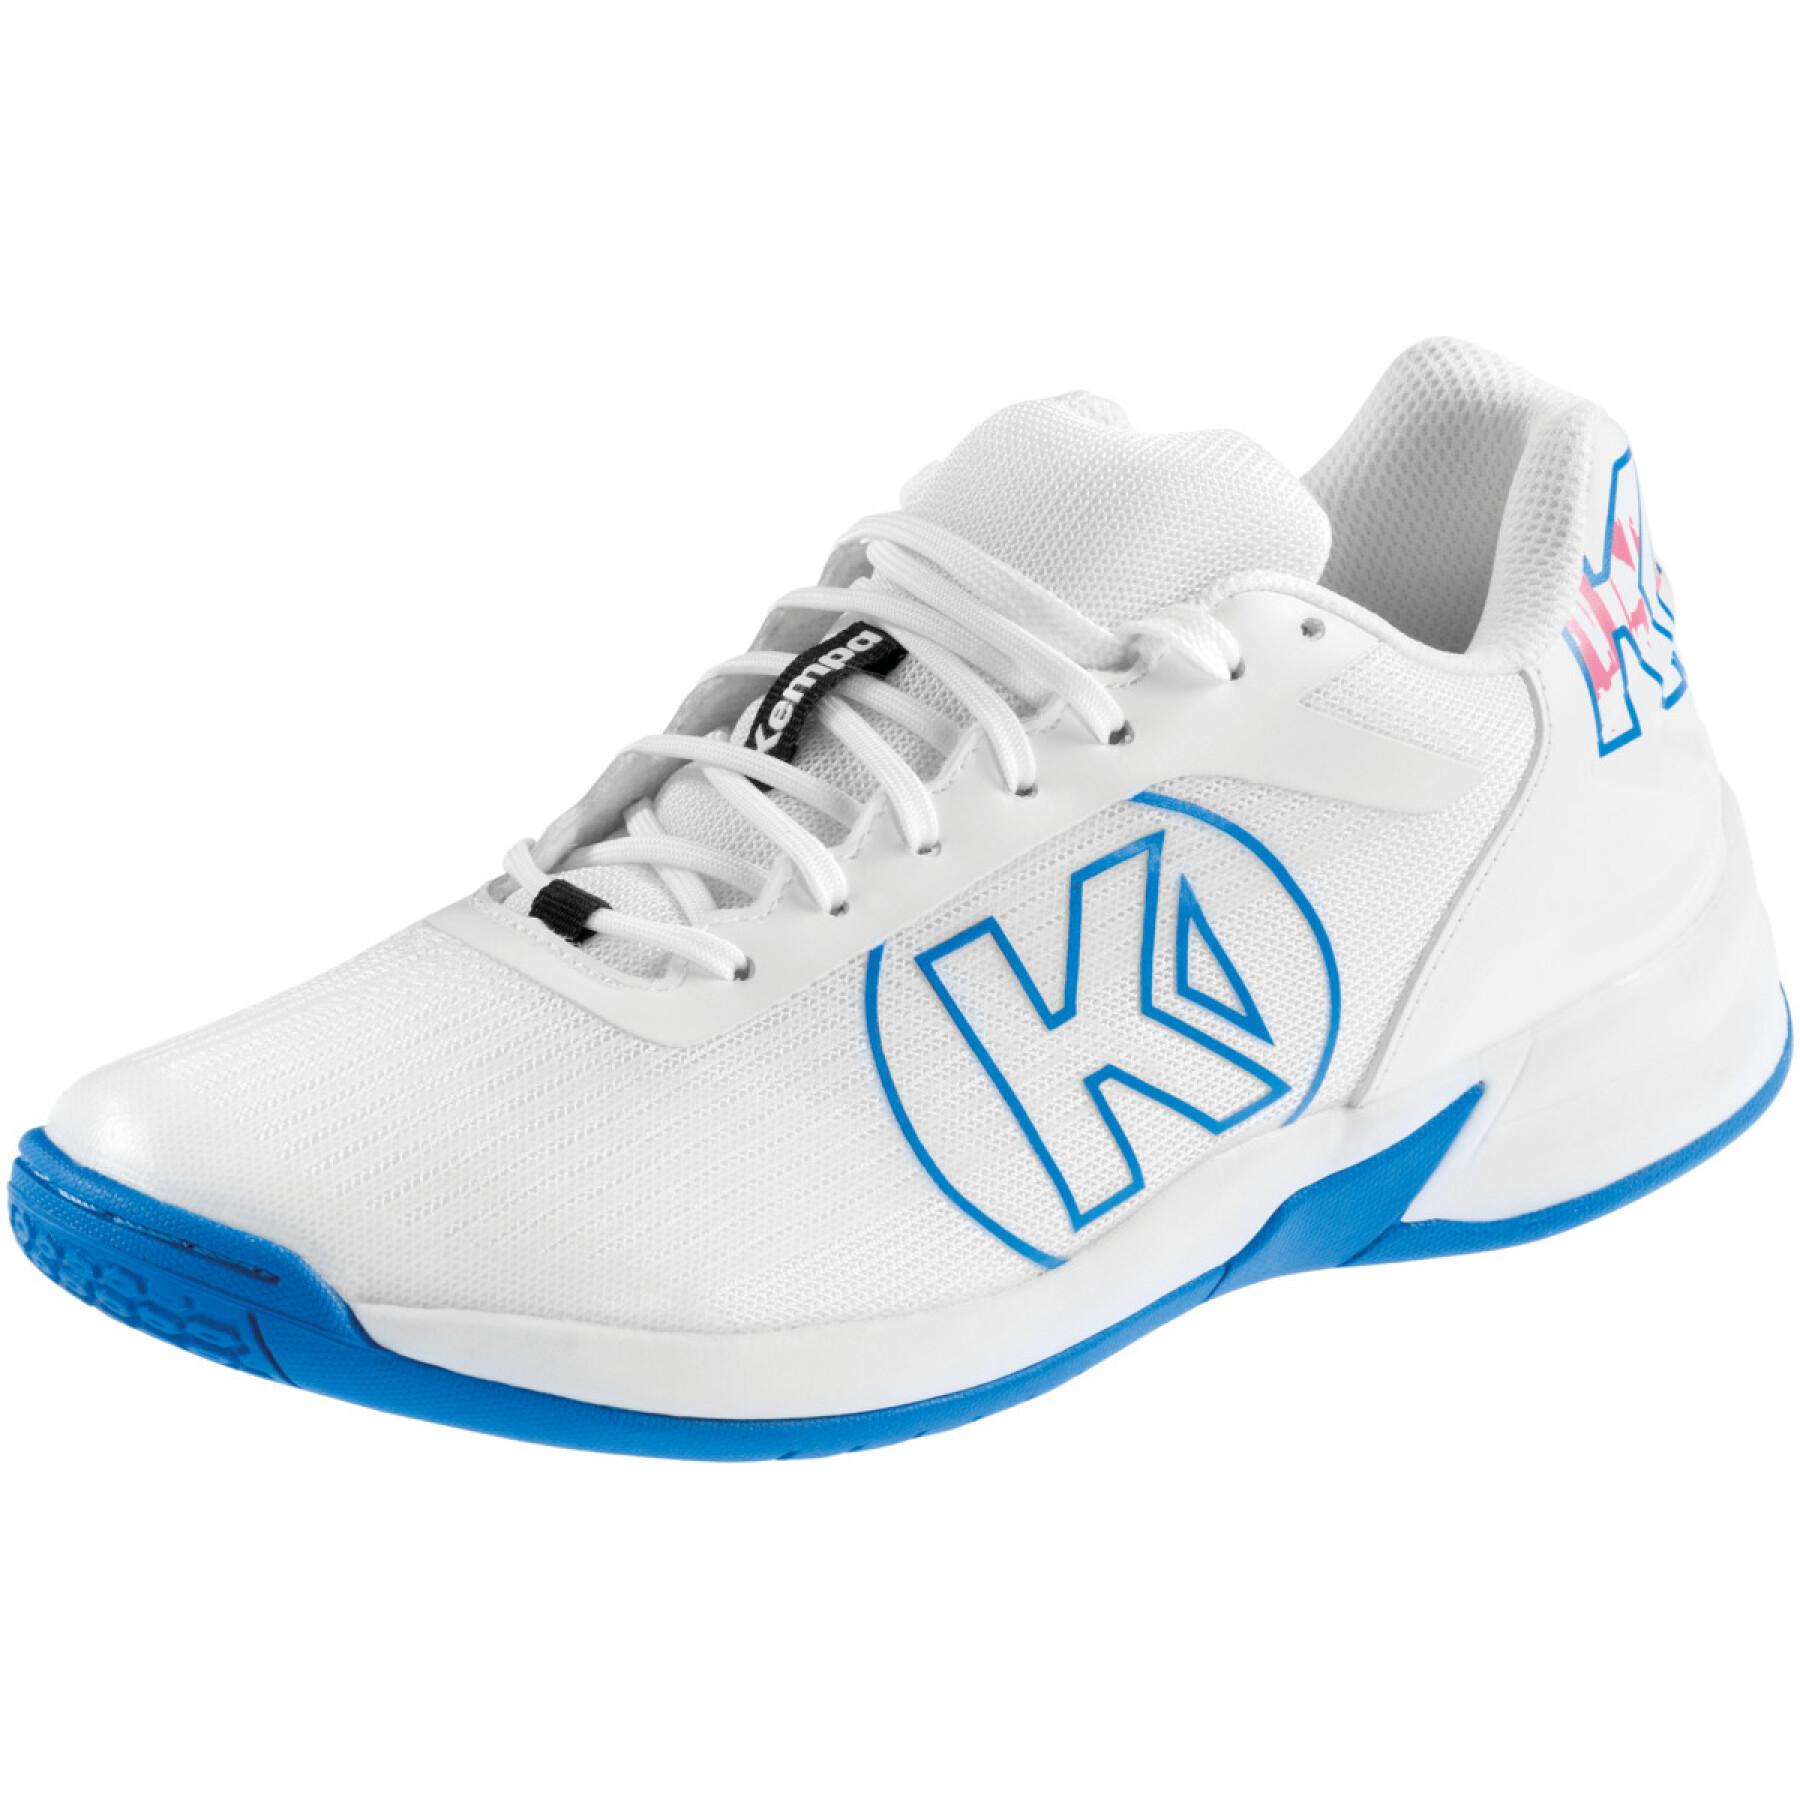 Indoor shoes for women Kempa Attack Three 2.0